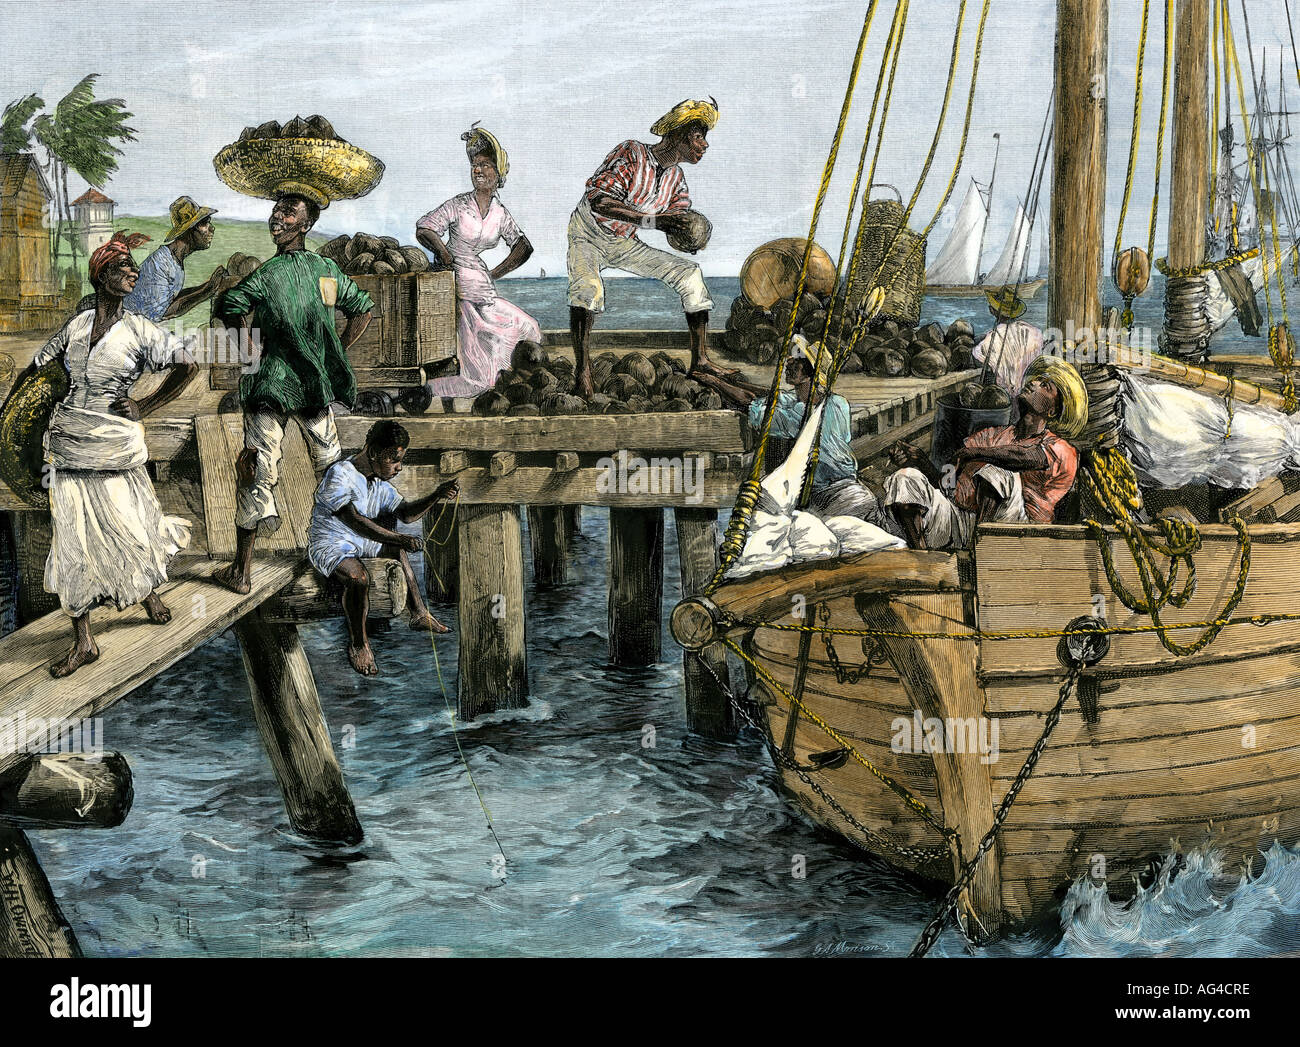 Loading a schooner with coconuts at Kingston Jamaica 1800s. Hand-colored woodcut Stock Photo